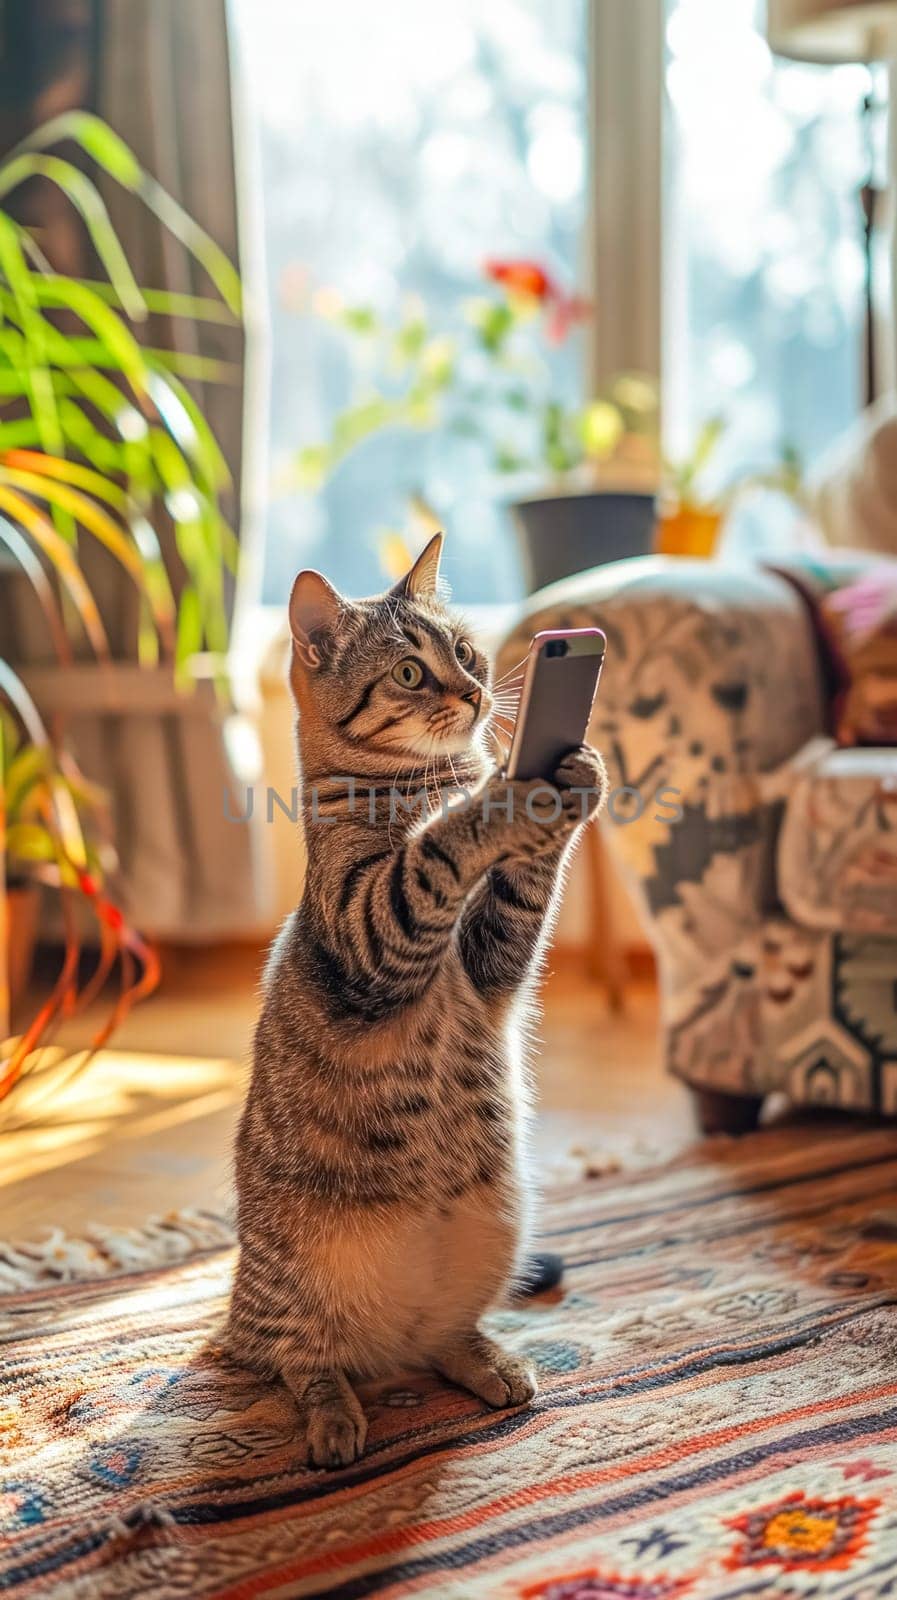 cute cat standing upright, holding a smartphone as if taking a selfie, in a cozy home environment with warm lighting. by Edophoto